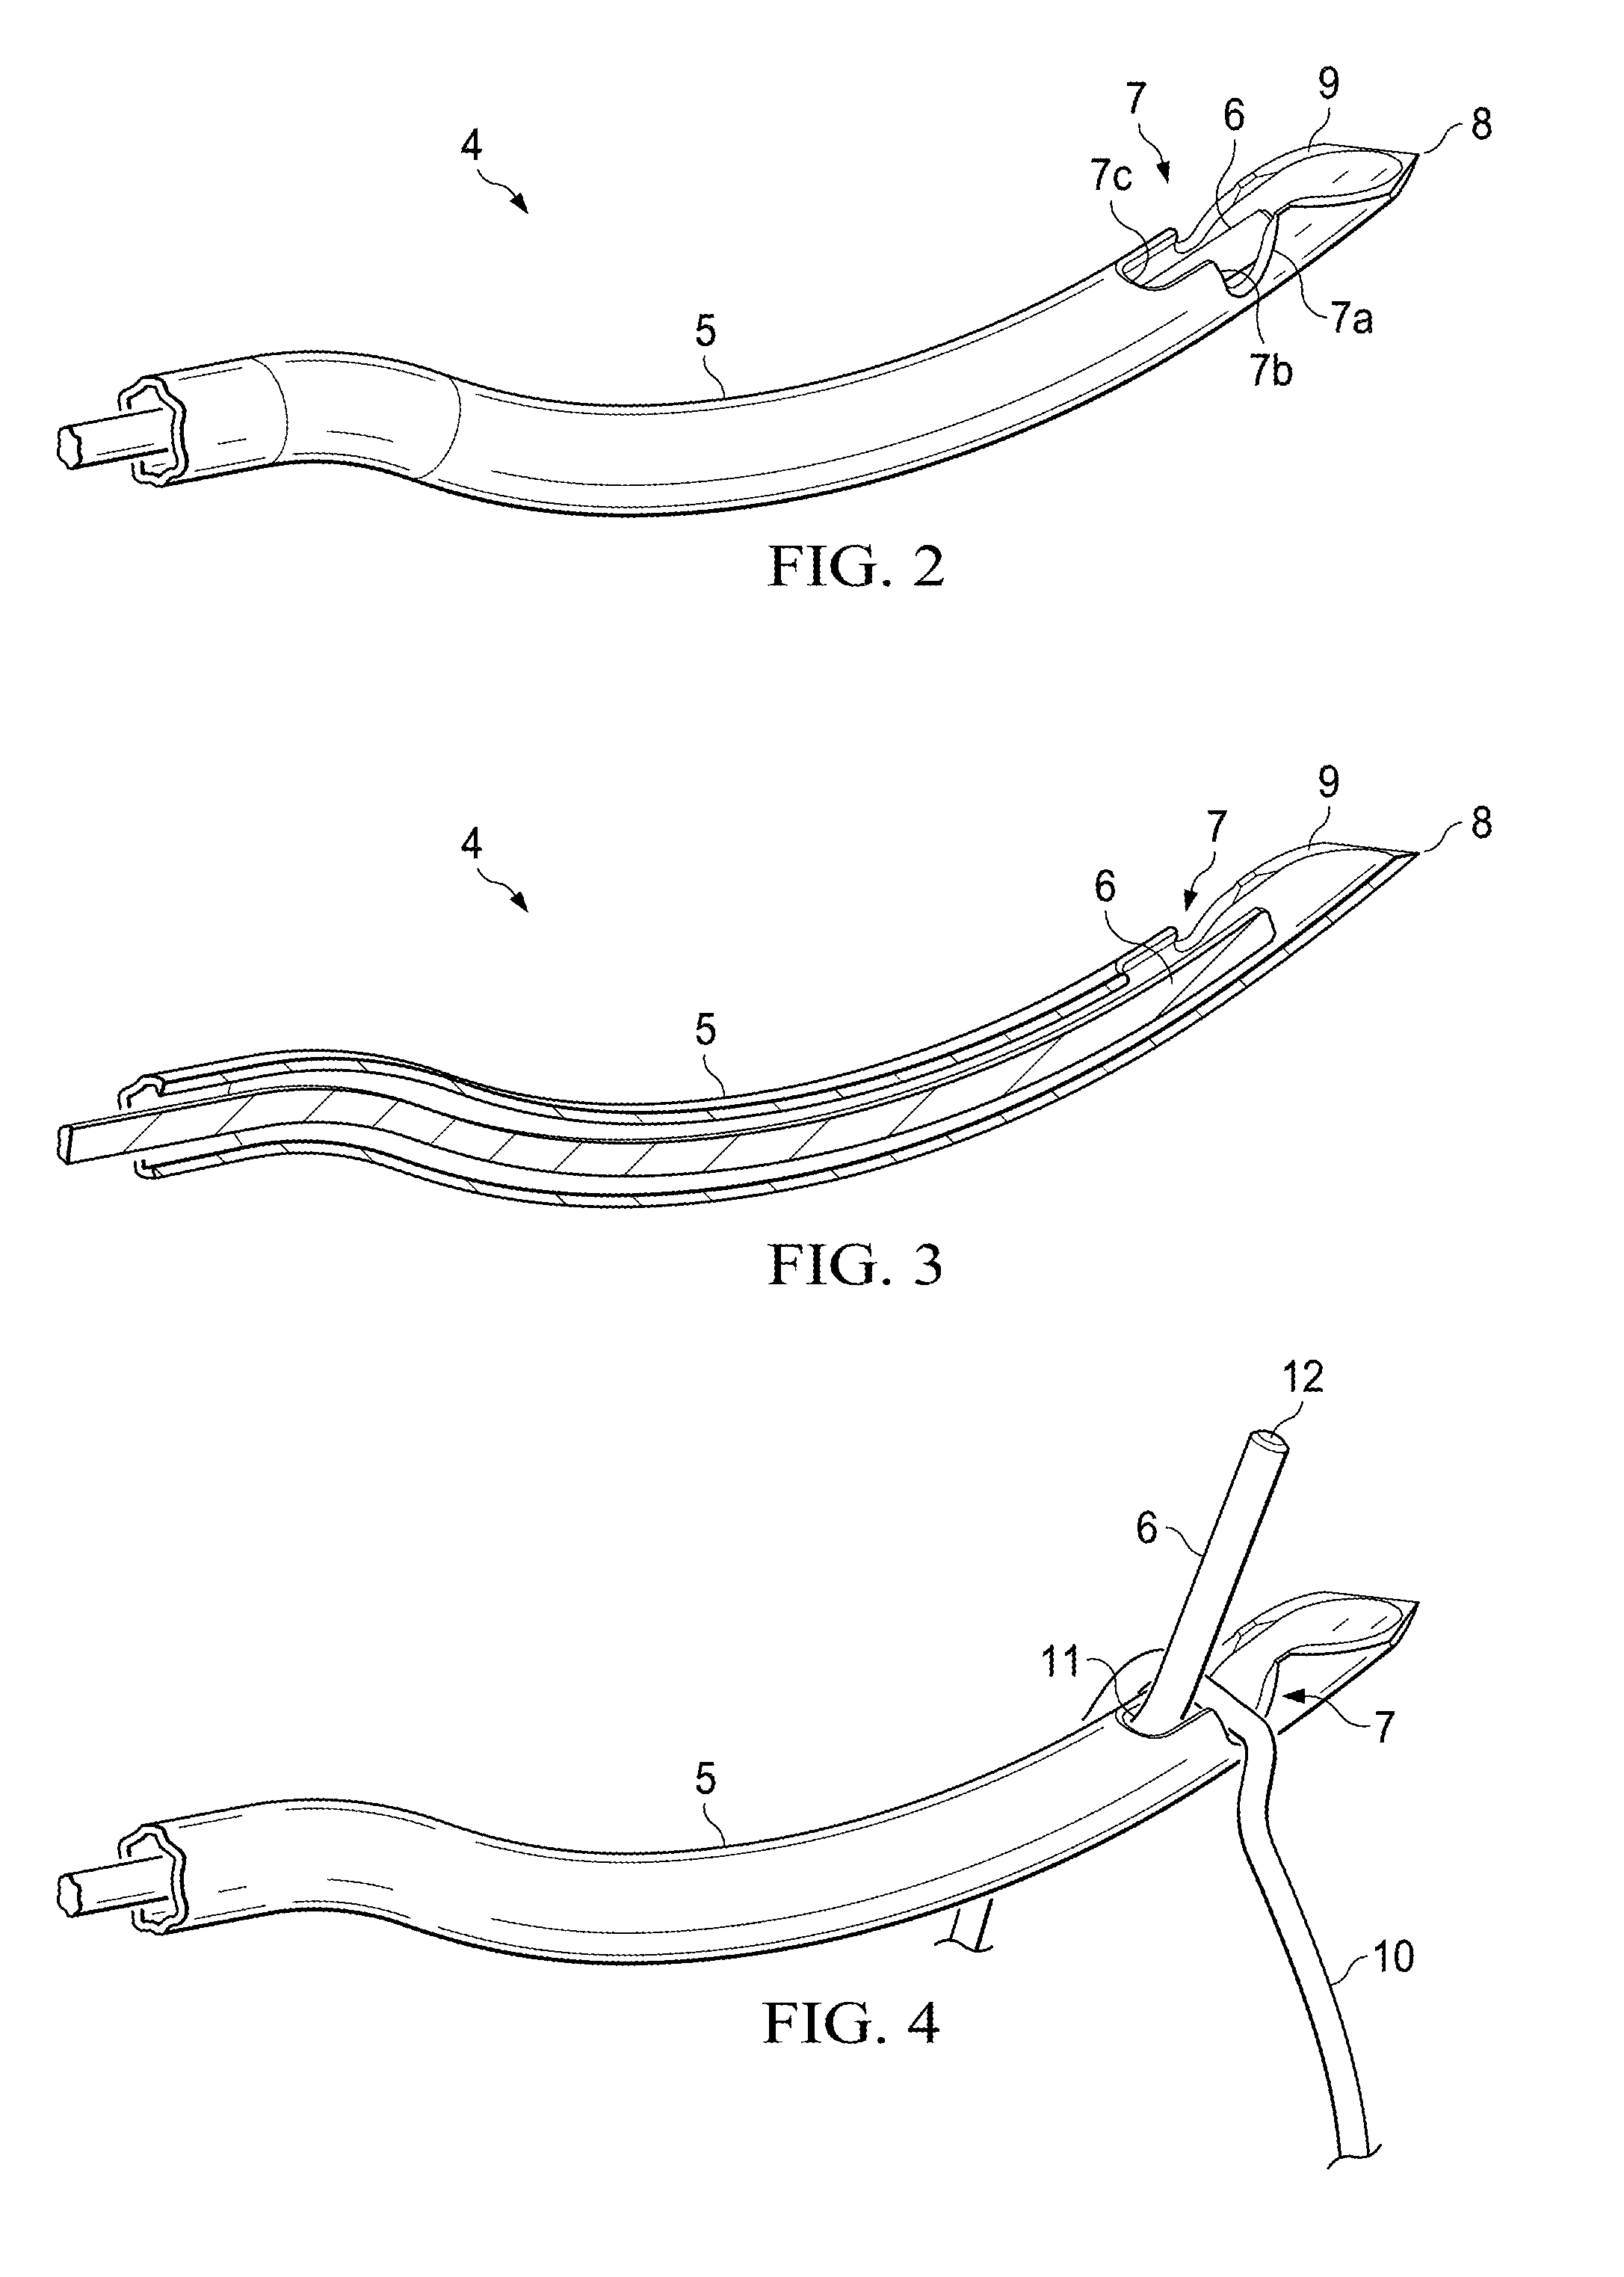 Surgical instrument for manipulating and passing suture